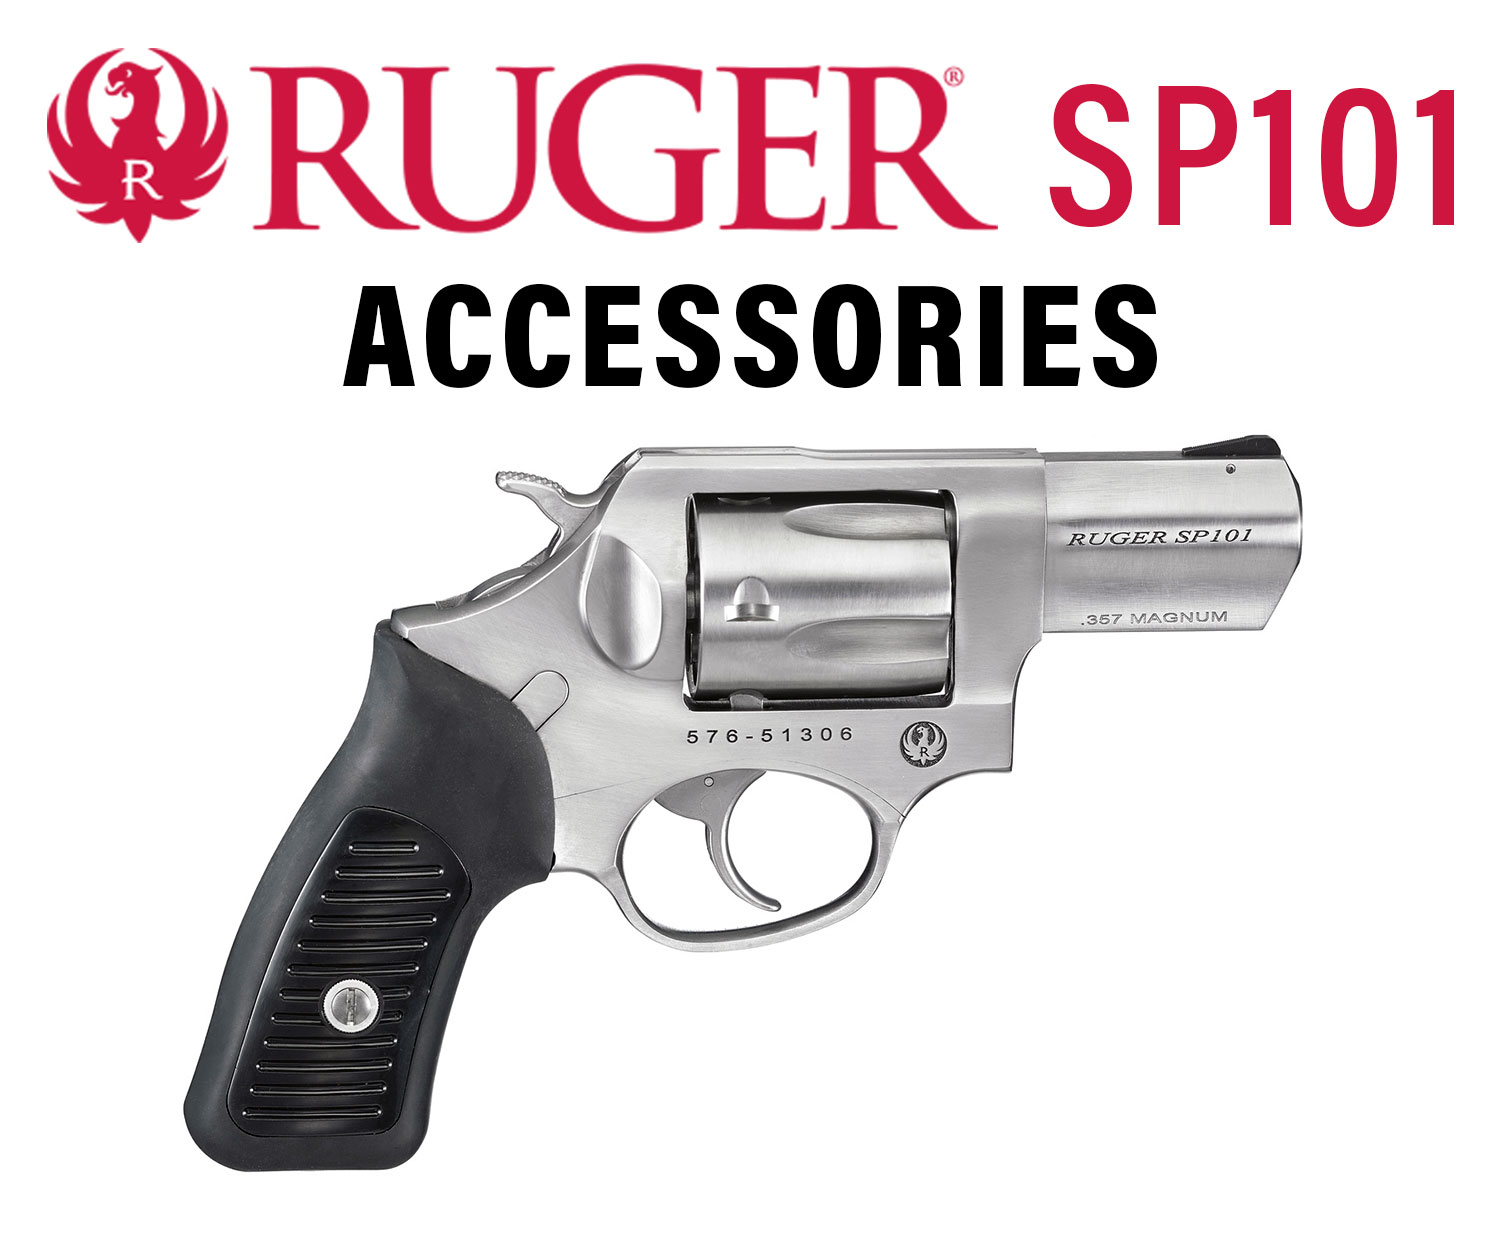 Ruger SP101 Accessories